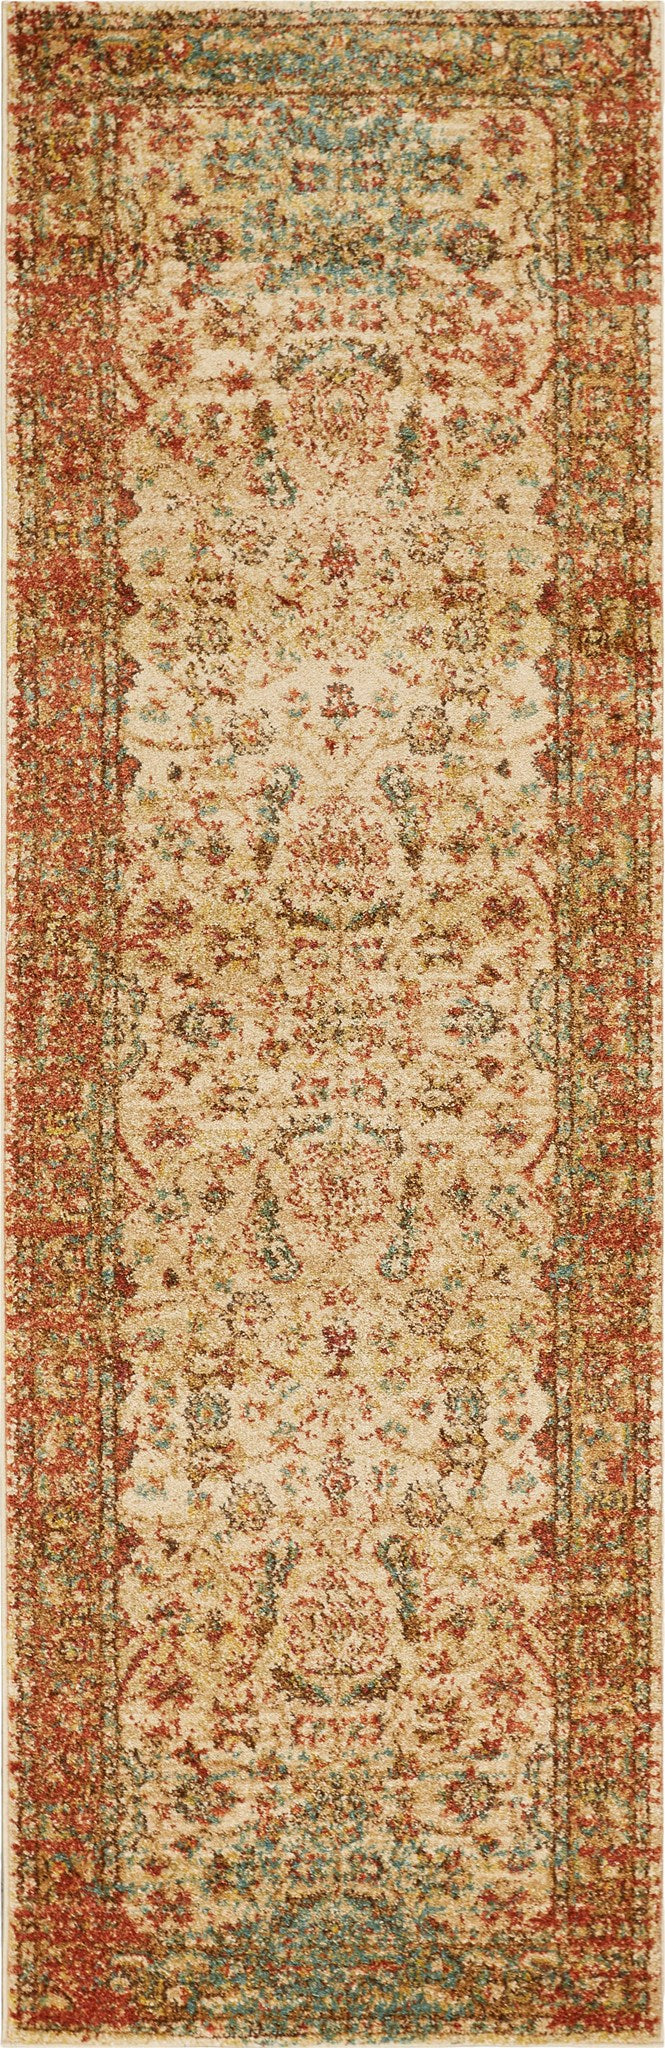 Traditions Sand Area Rug